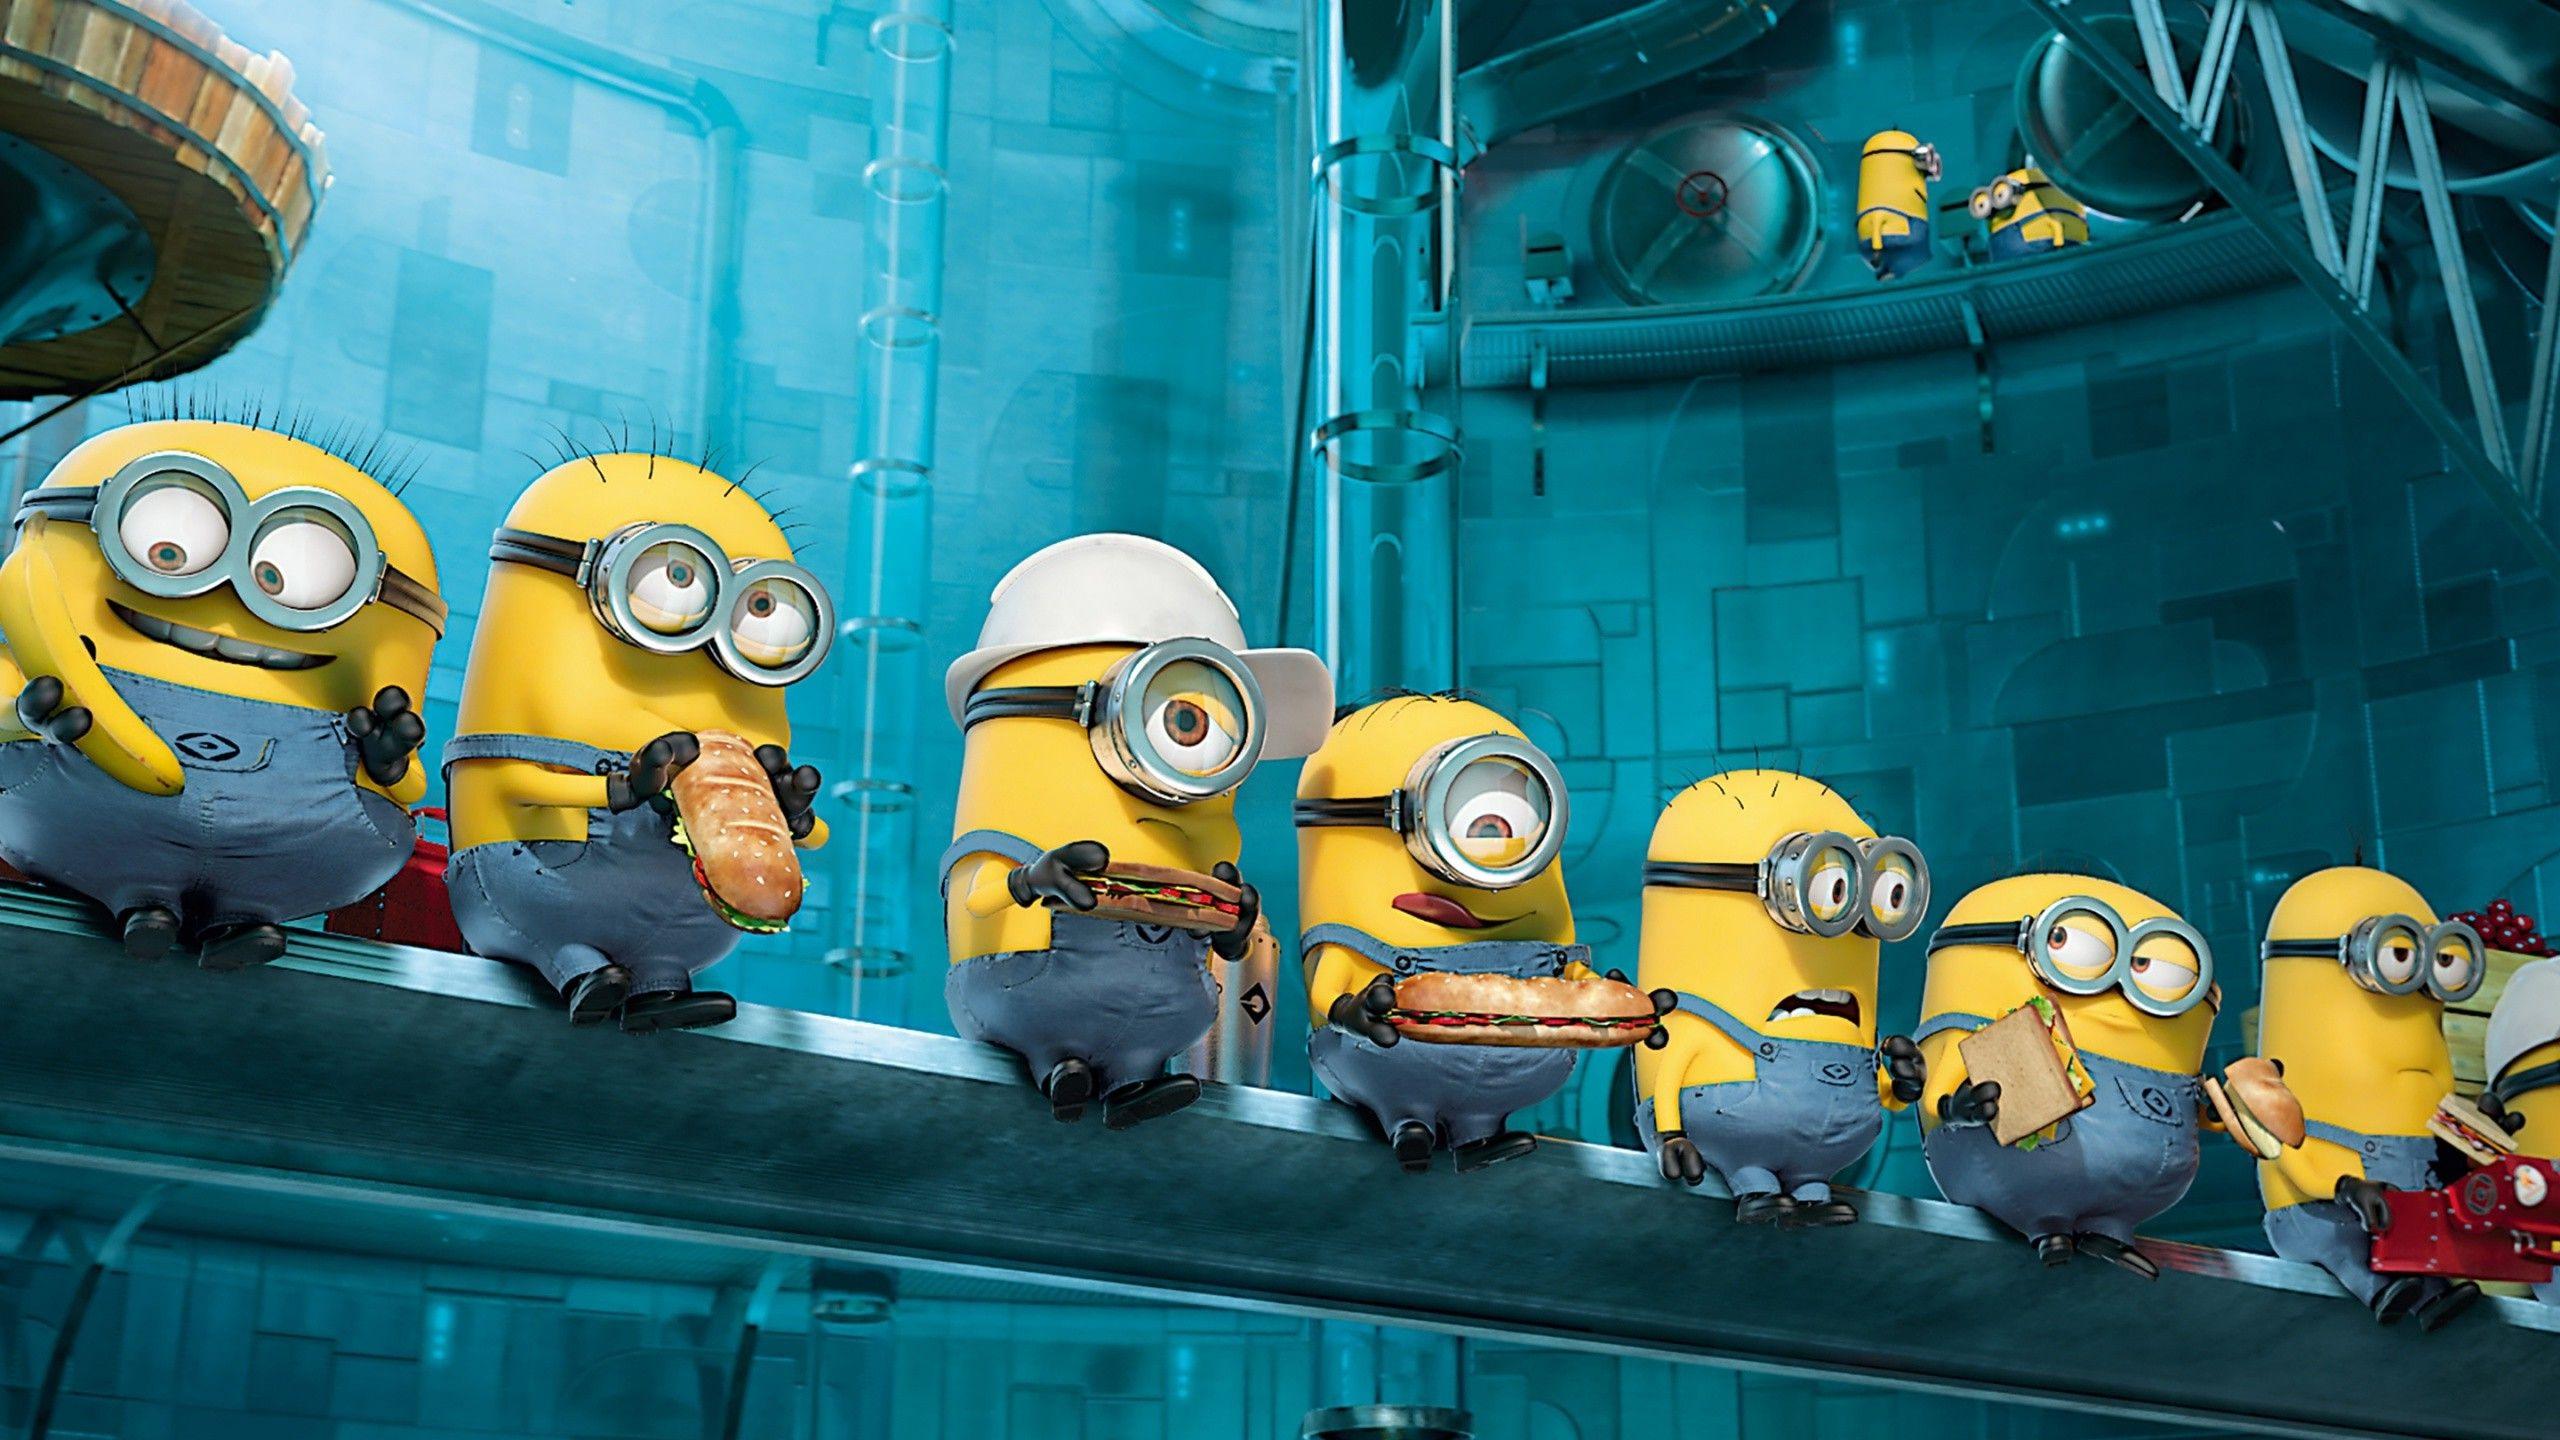 Minion For Laptop Wallpapers